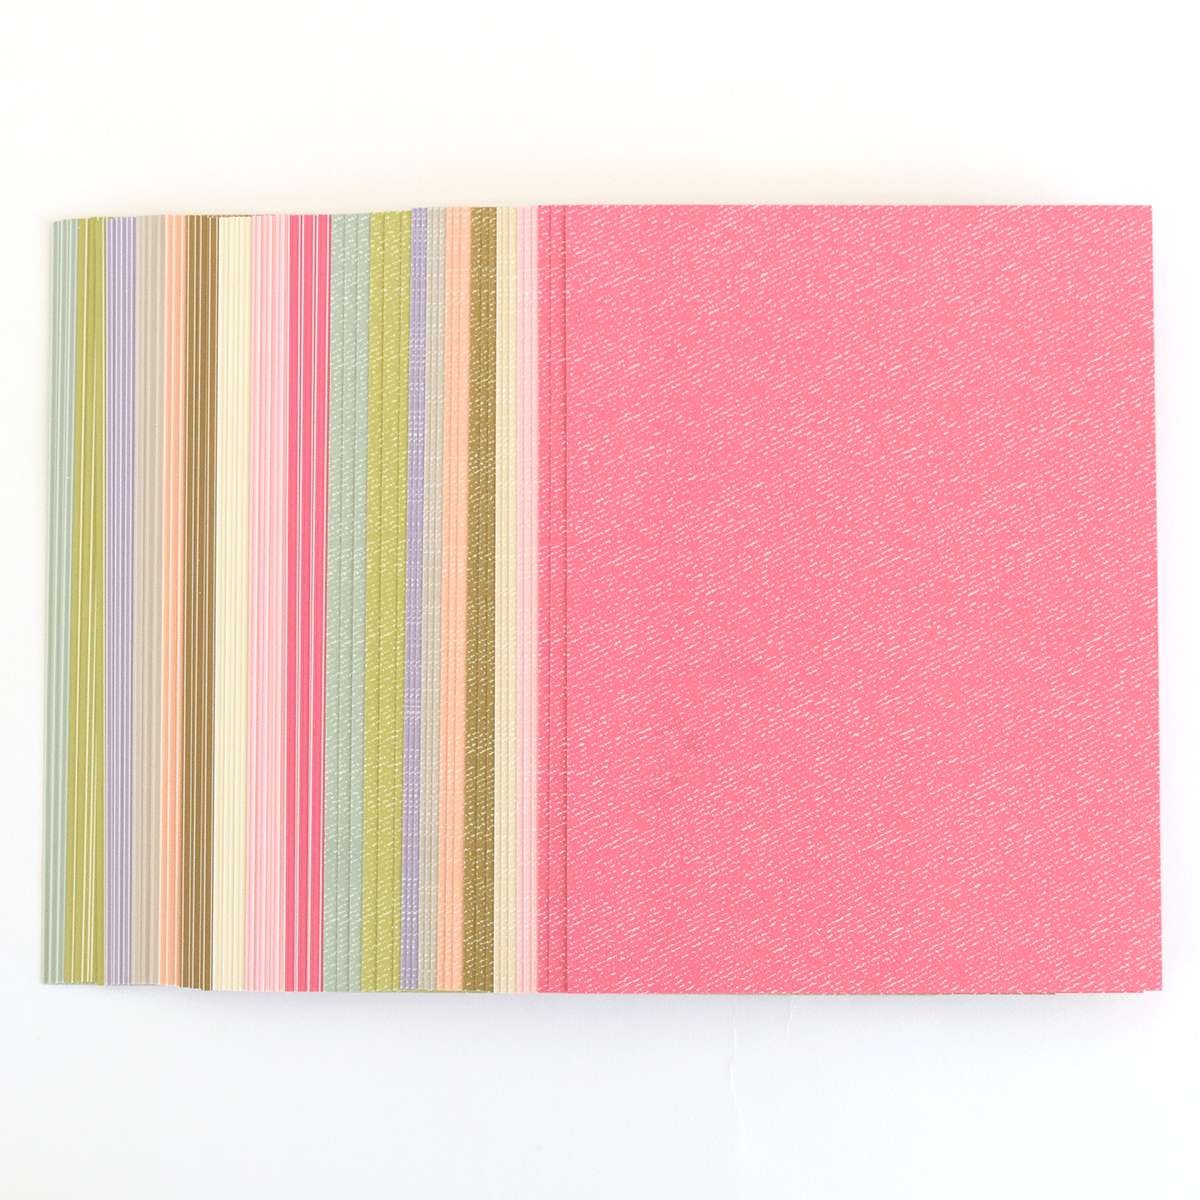 a close up of a book with a pink cover.